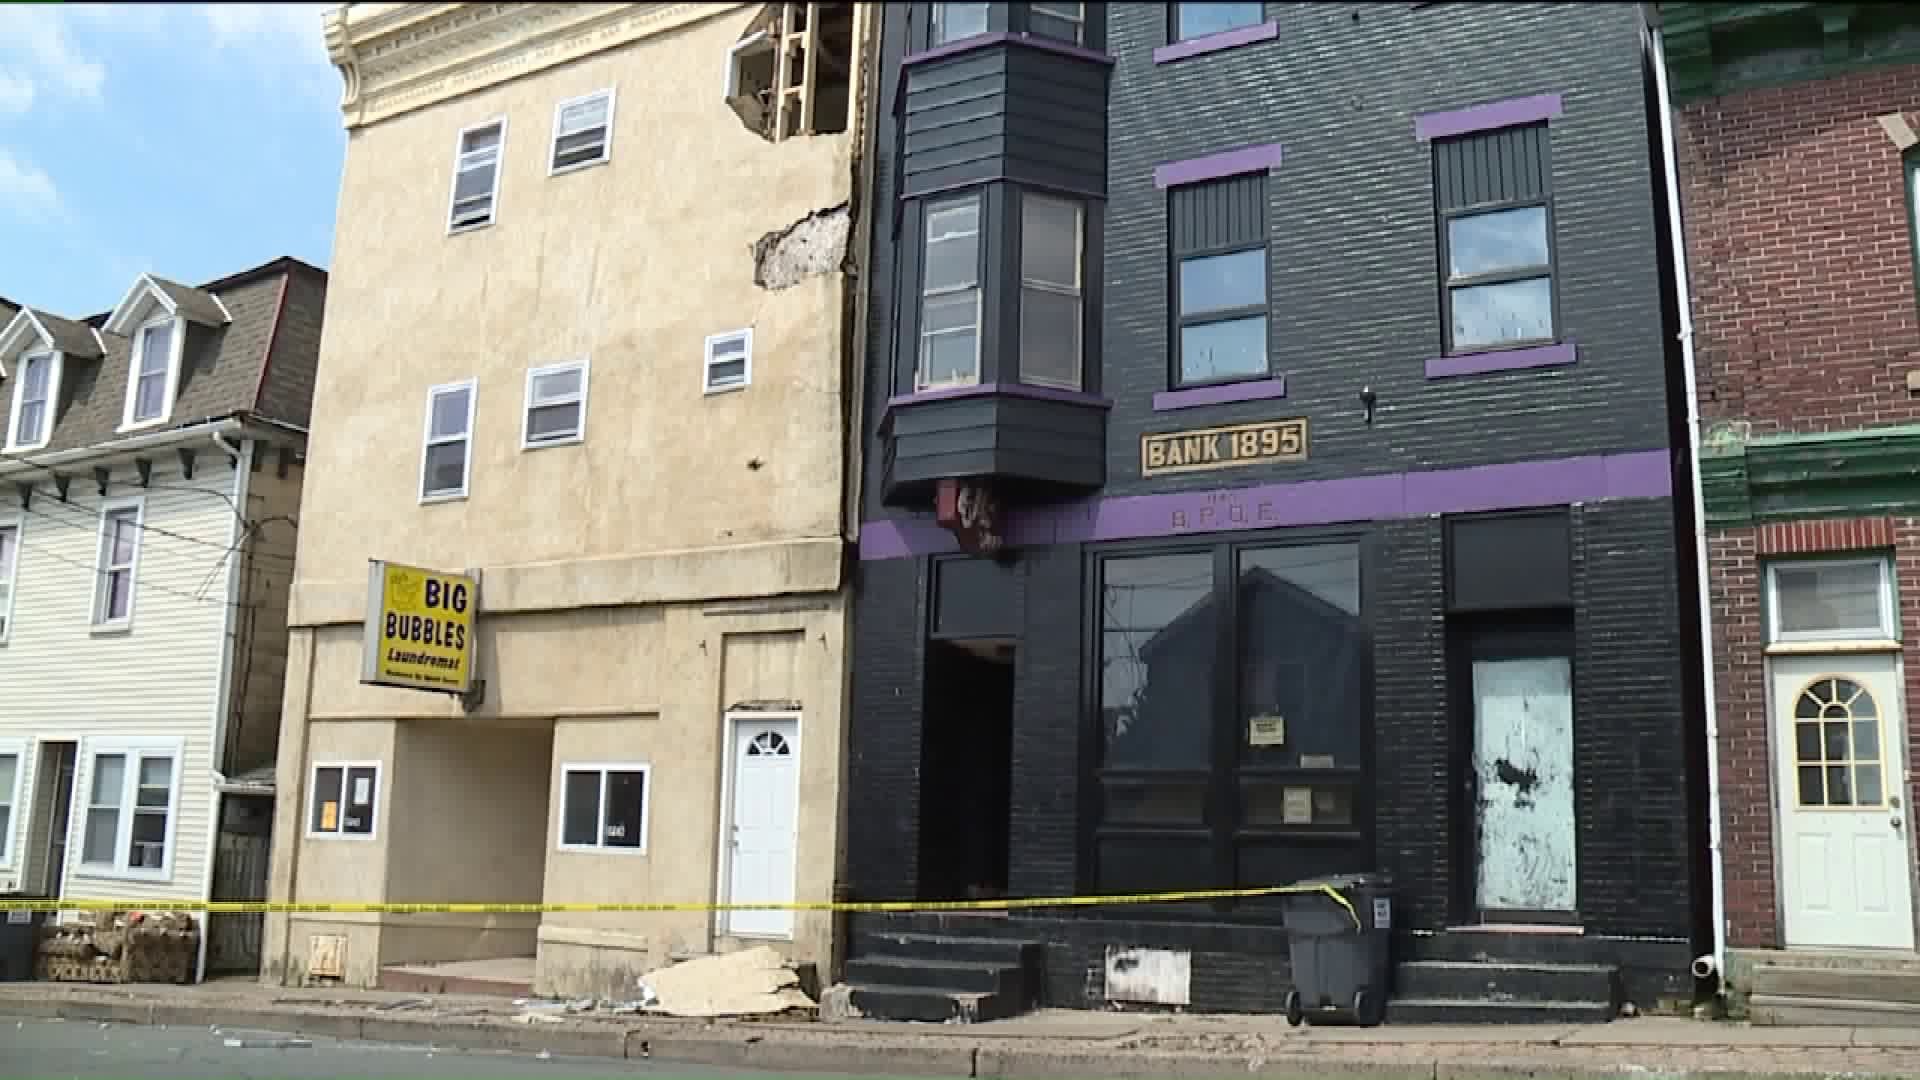 Building Has Crumbling Facade in Luzerne County